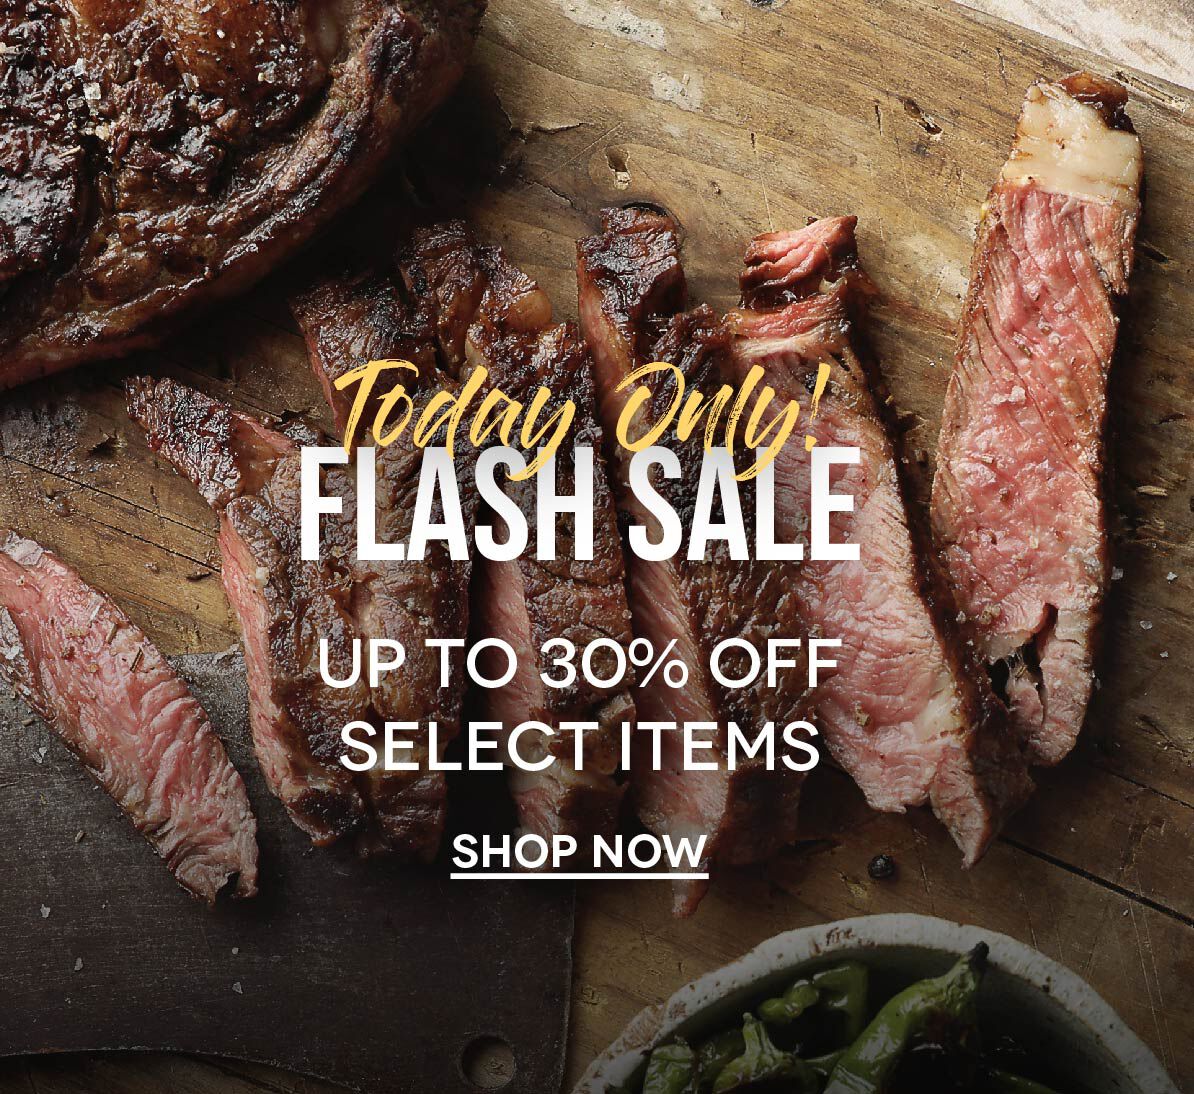 Flash Sale! Up to 30% OFF Select Items